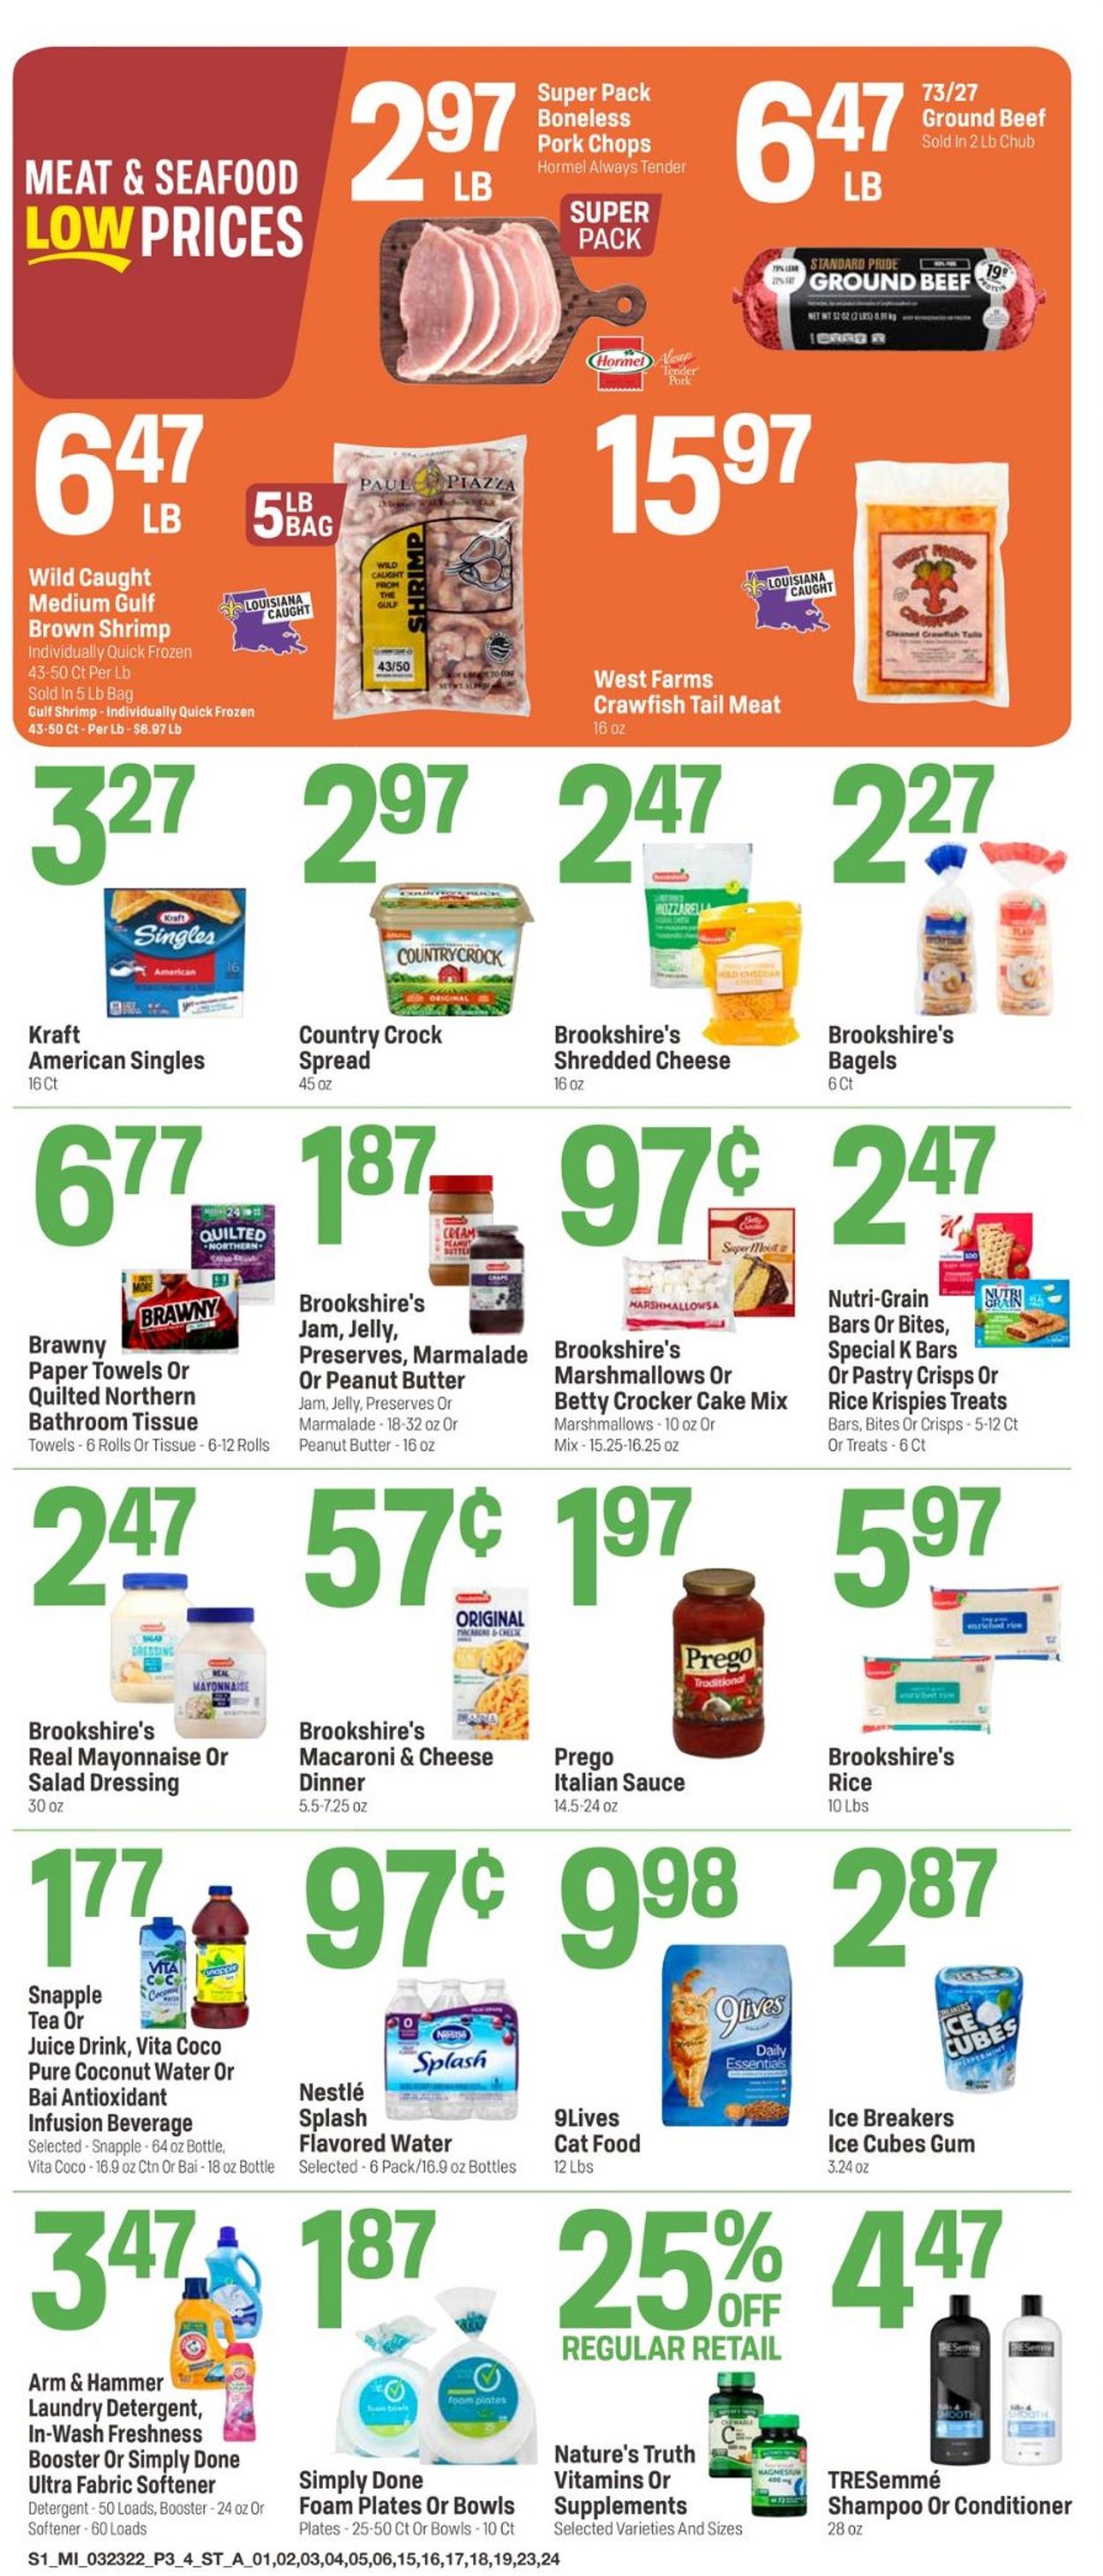 Catalogue Super 1 Foods from 03/23/2022